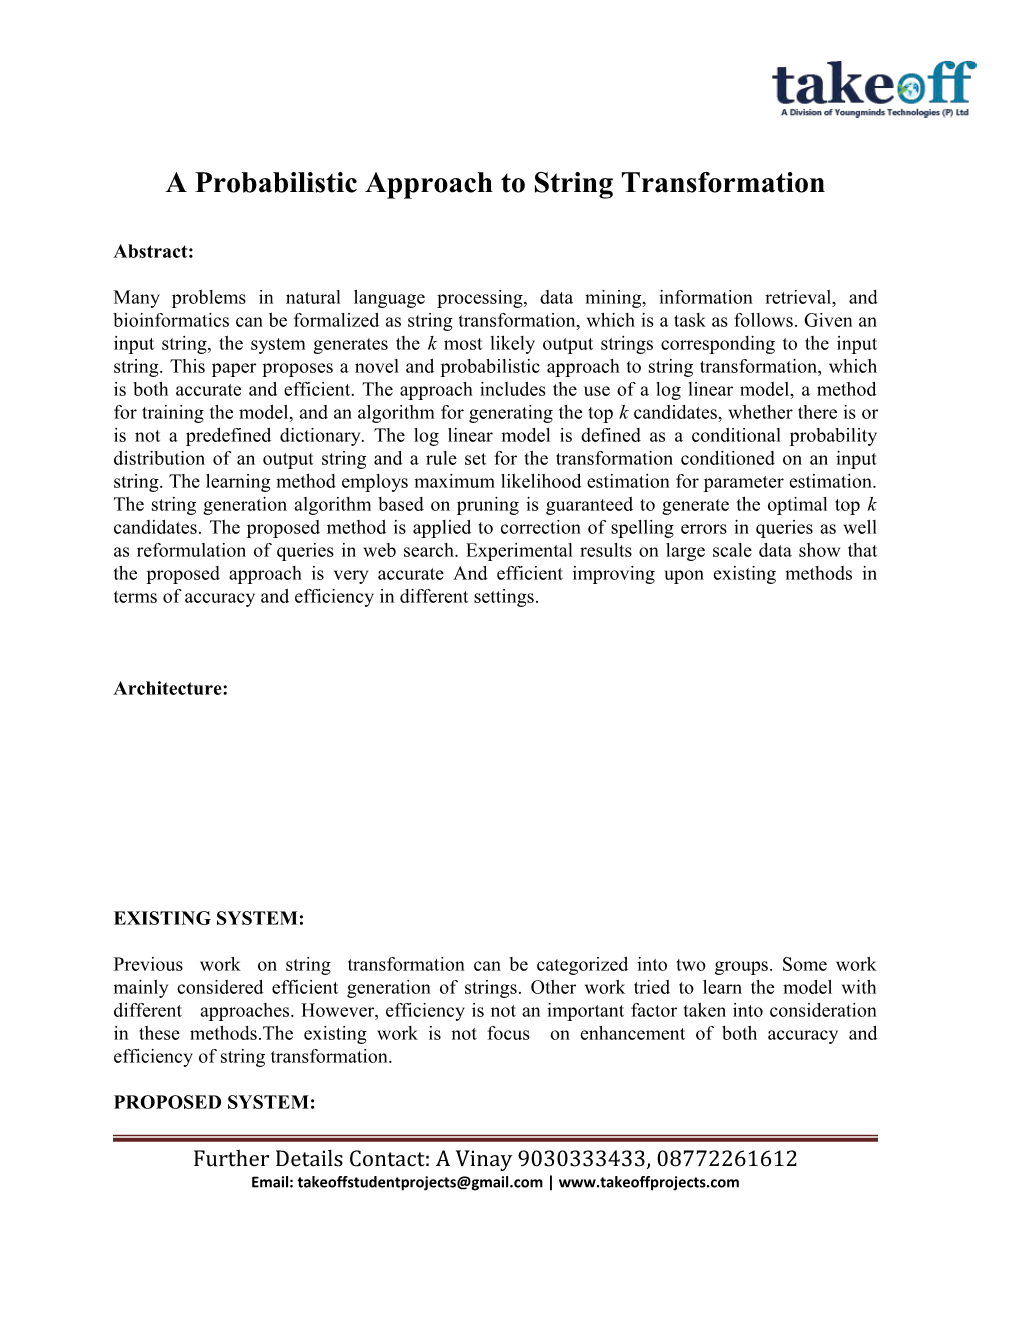 A Probabilistic Approach to String Transformation